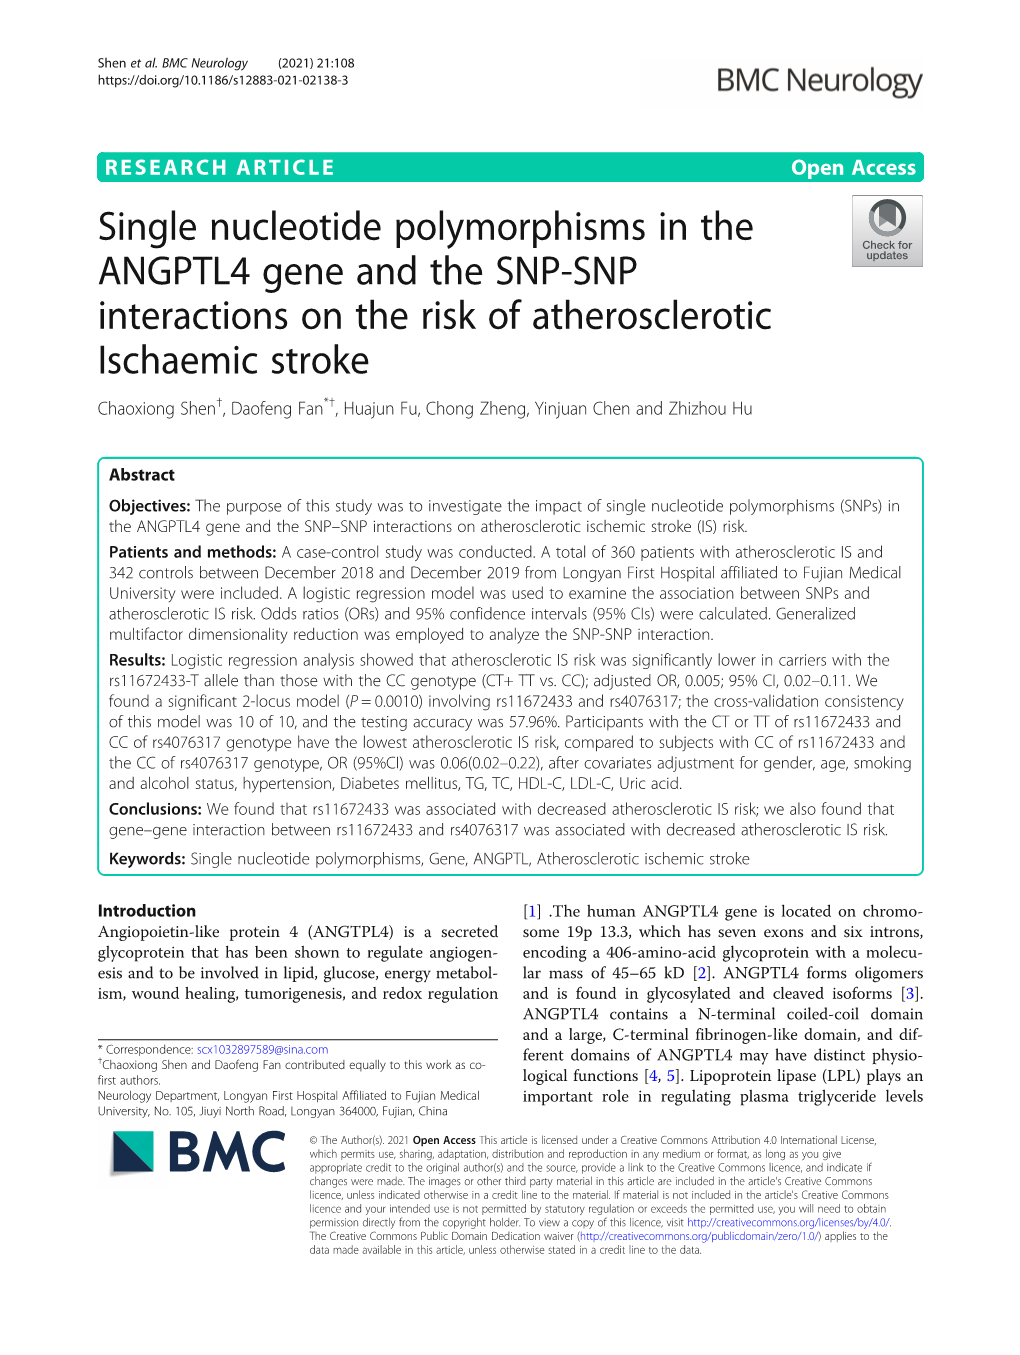 Single Nucleotide Polymorphisms in the ANGPTL4 Gene and the SNP